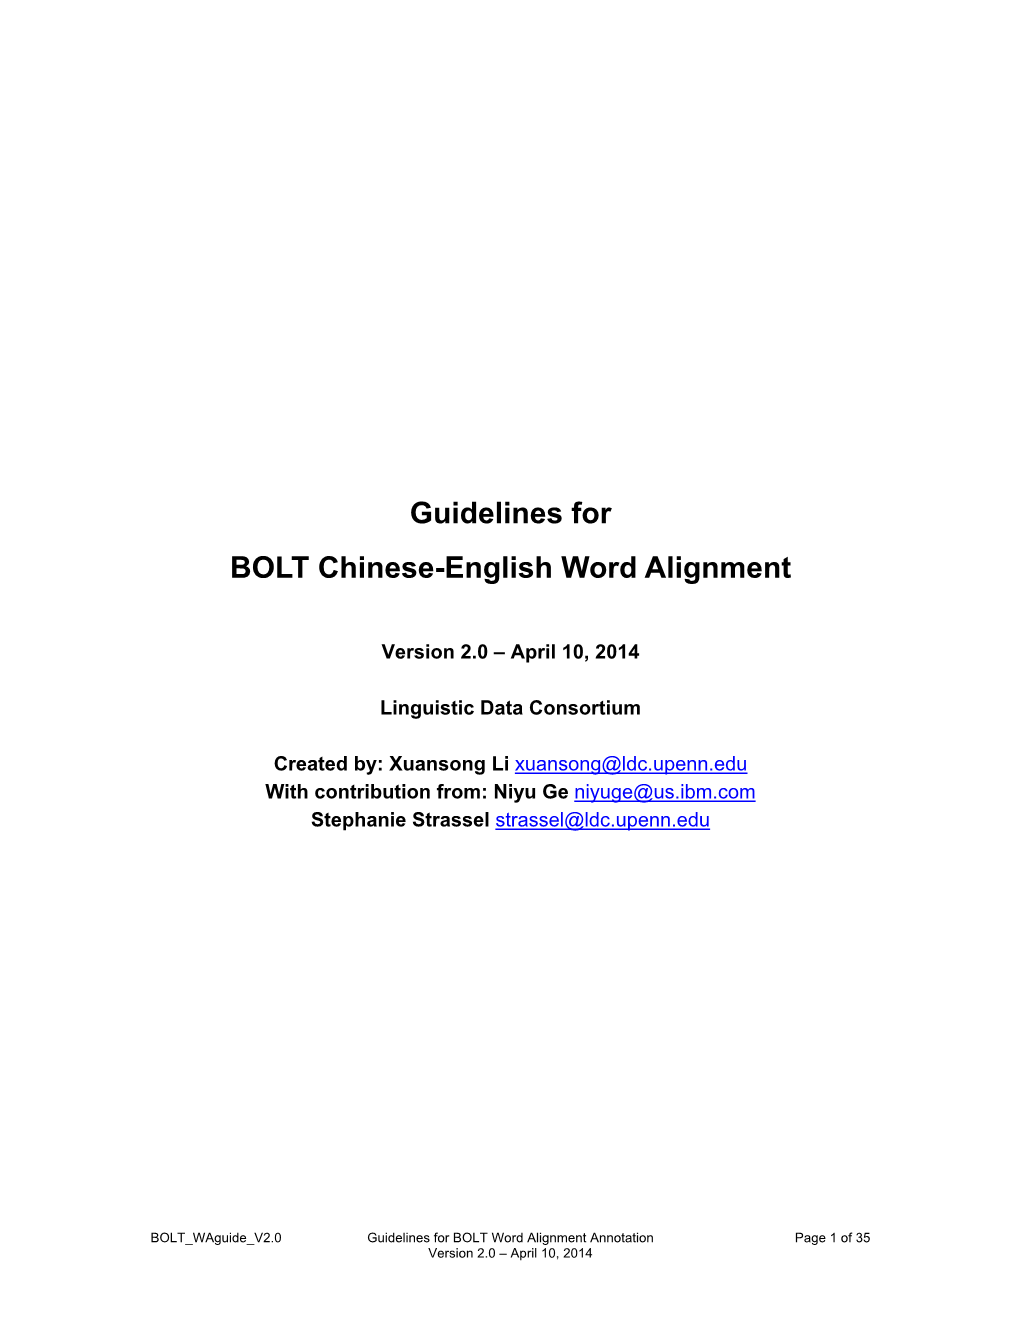 Guidelines for BOLT Chinese-English Word Alignment